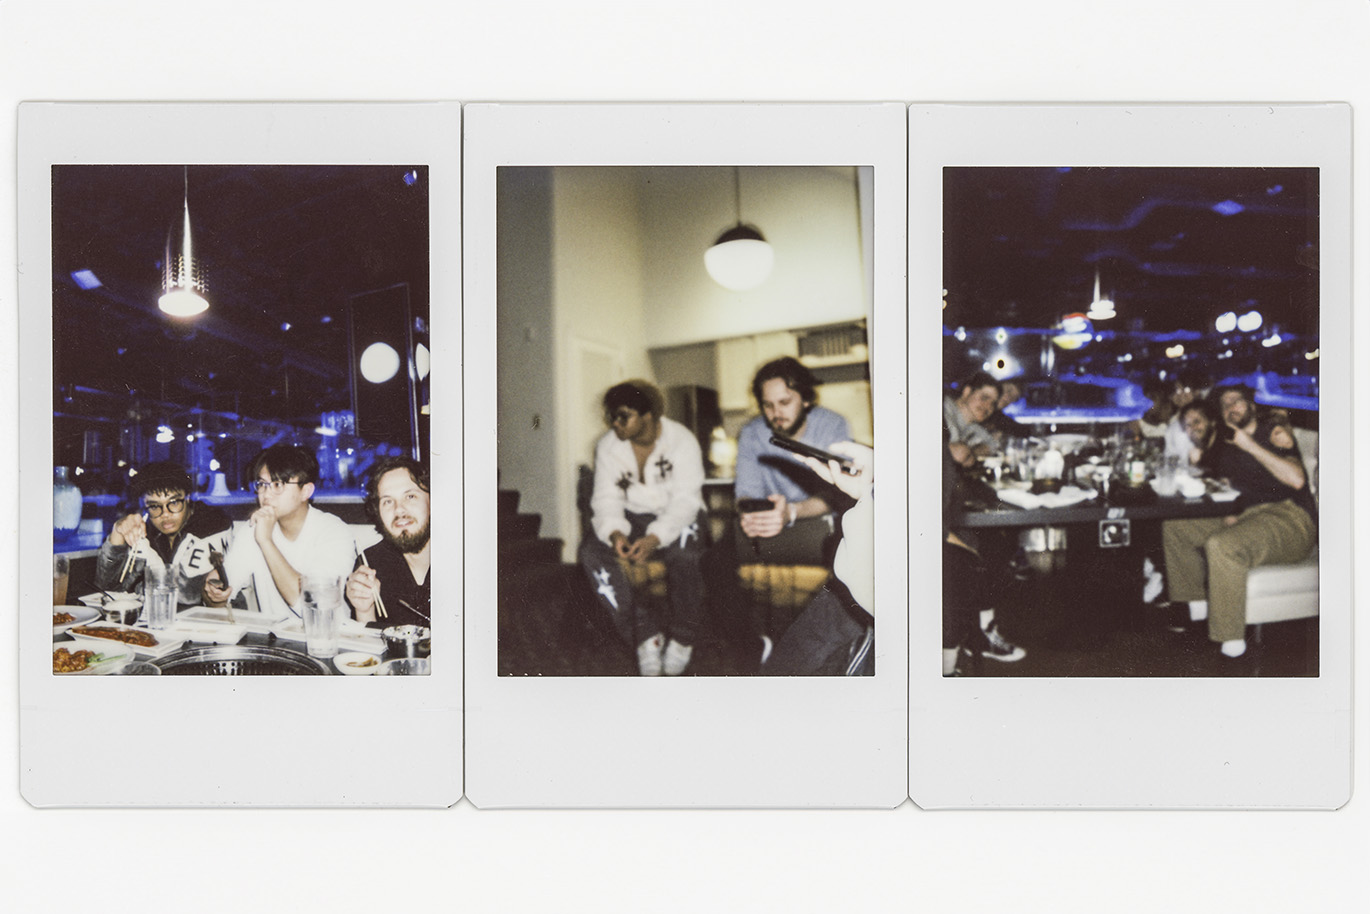 Set of three scanned polaroid photos showing college students spending time together.